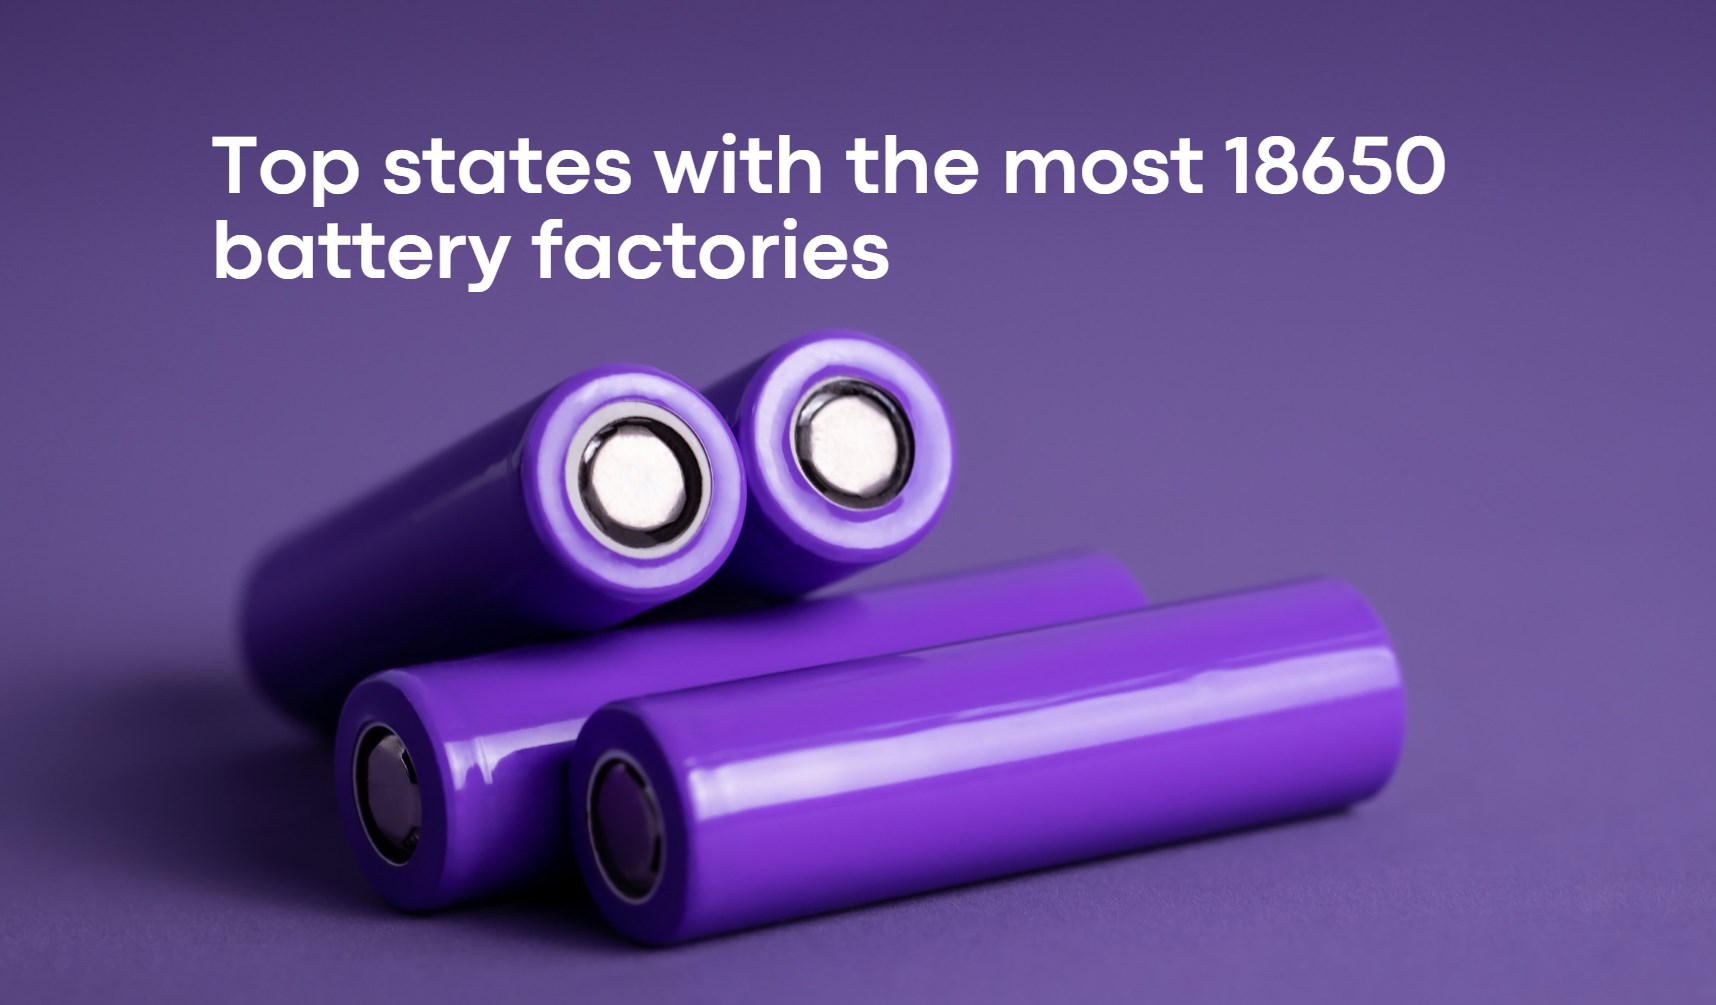 Top states with the most 18650 battery factories